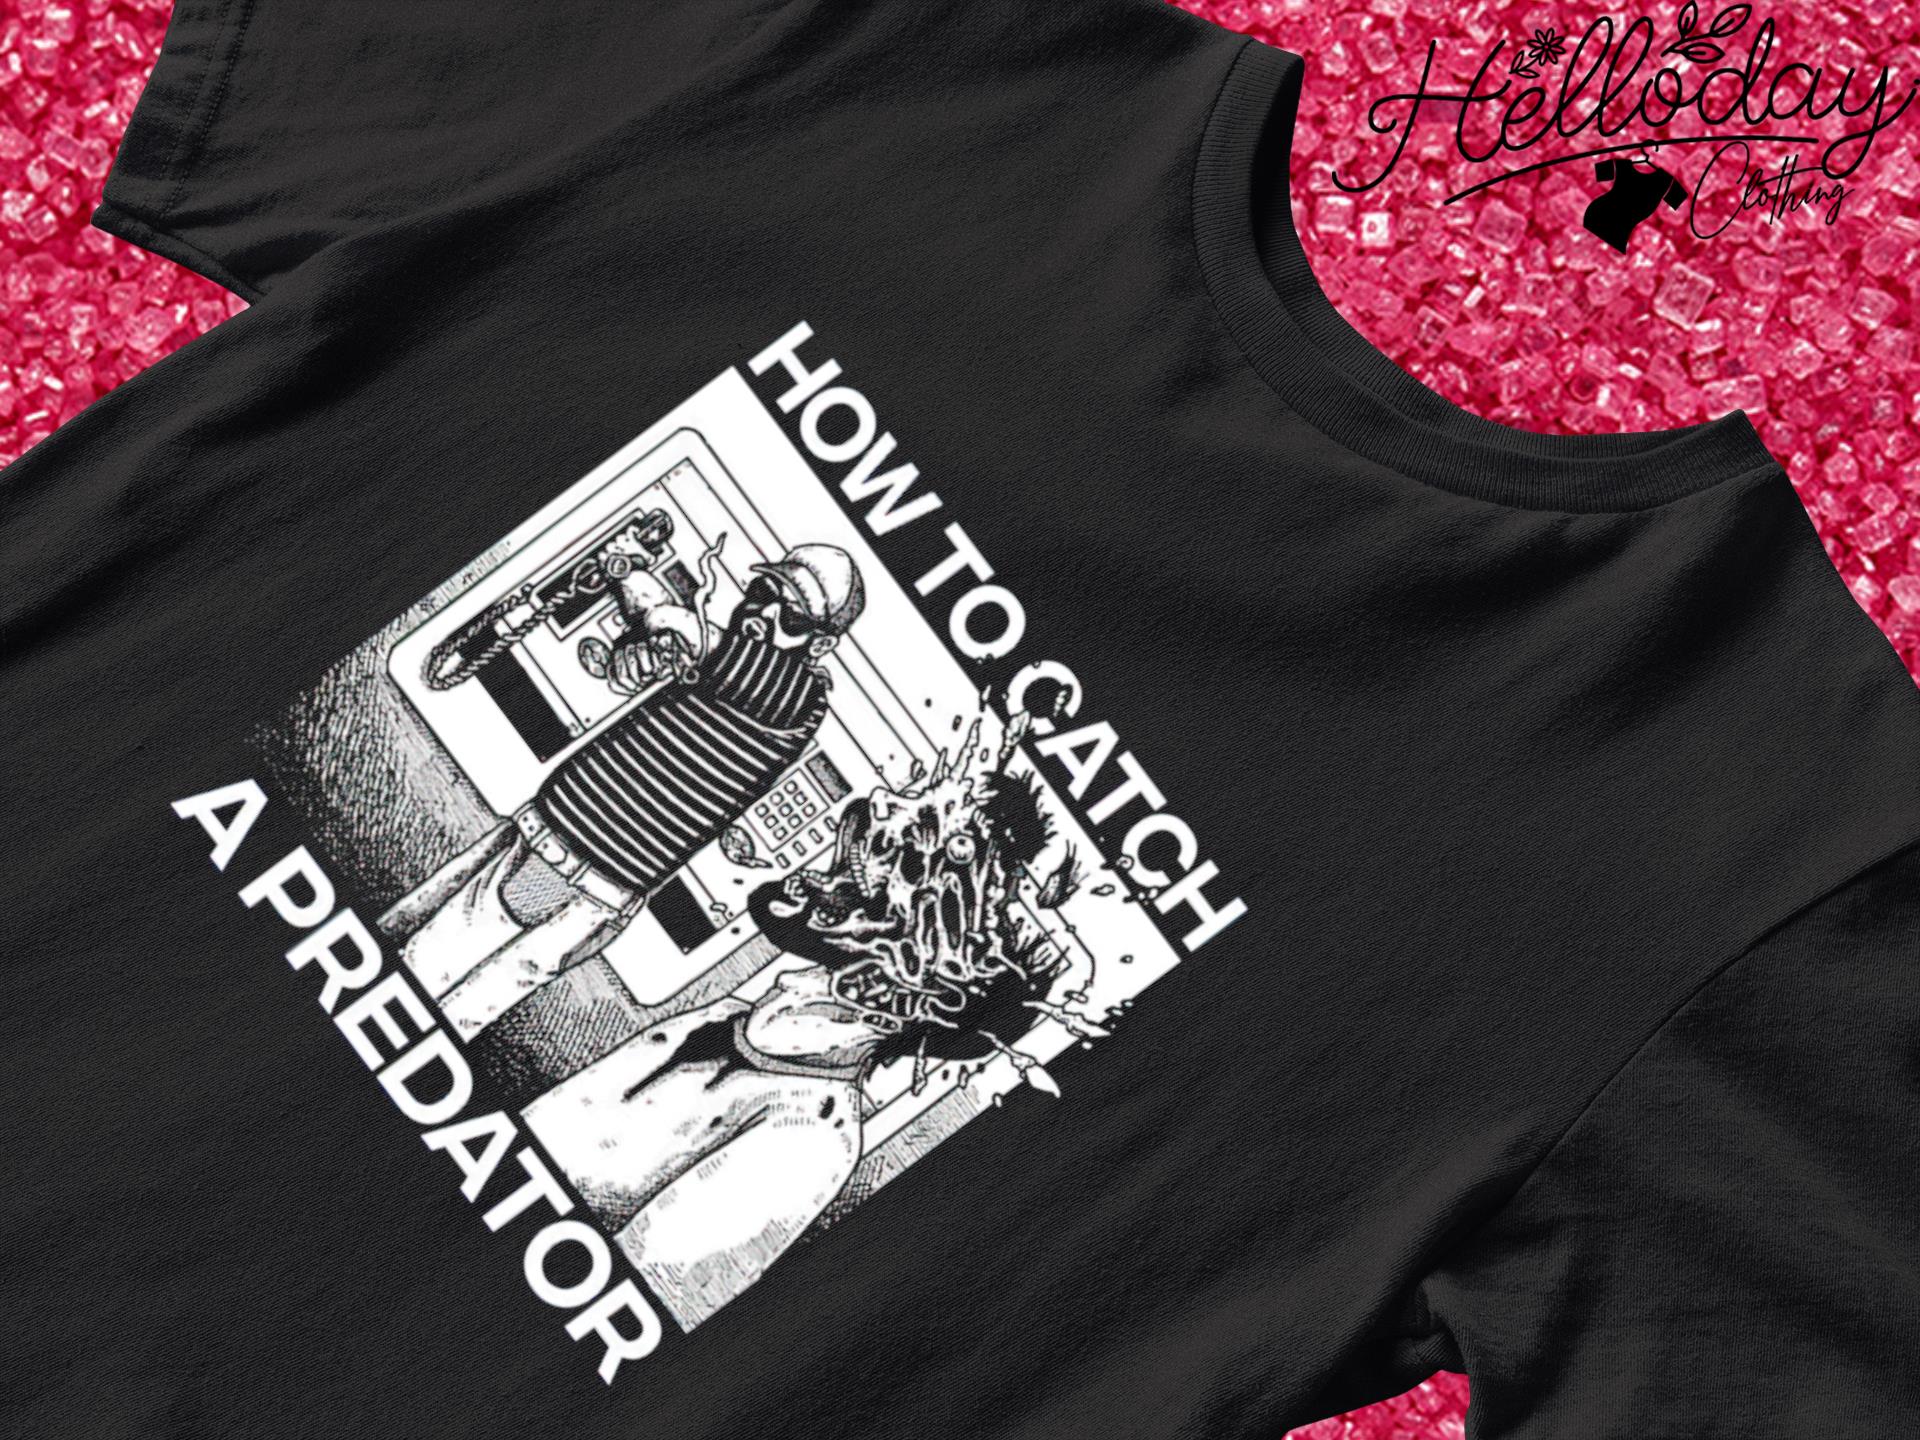 How To Catch A Predator shirt, hoodie, sweater, long sleeve and tank top